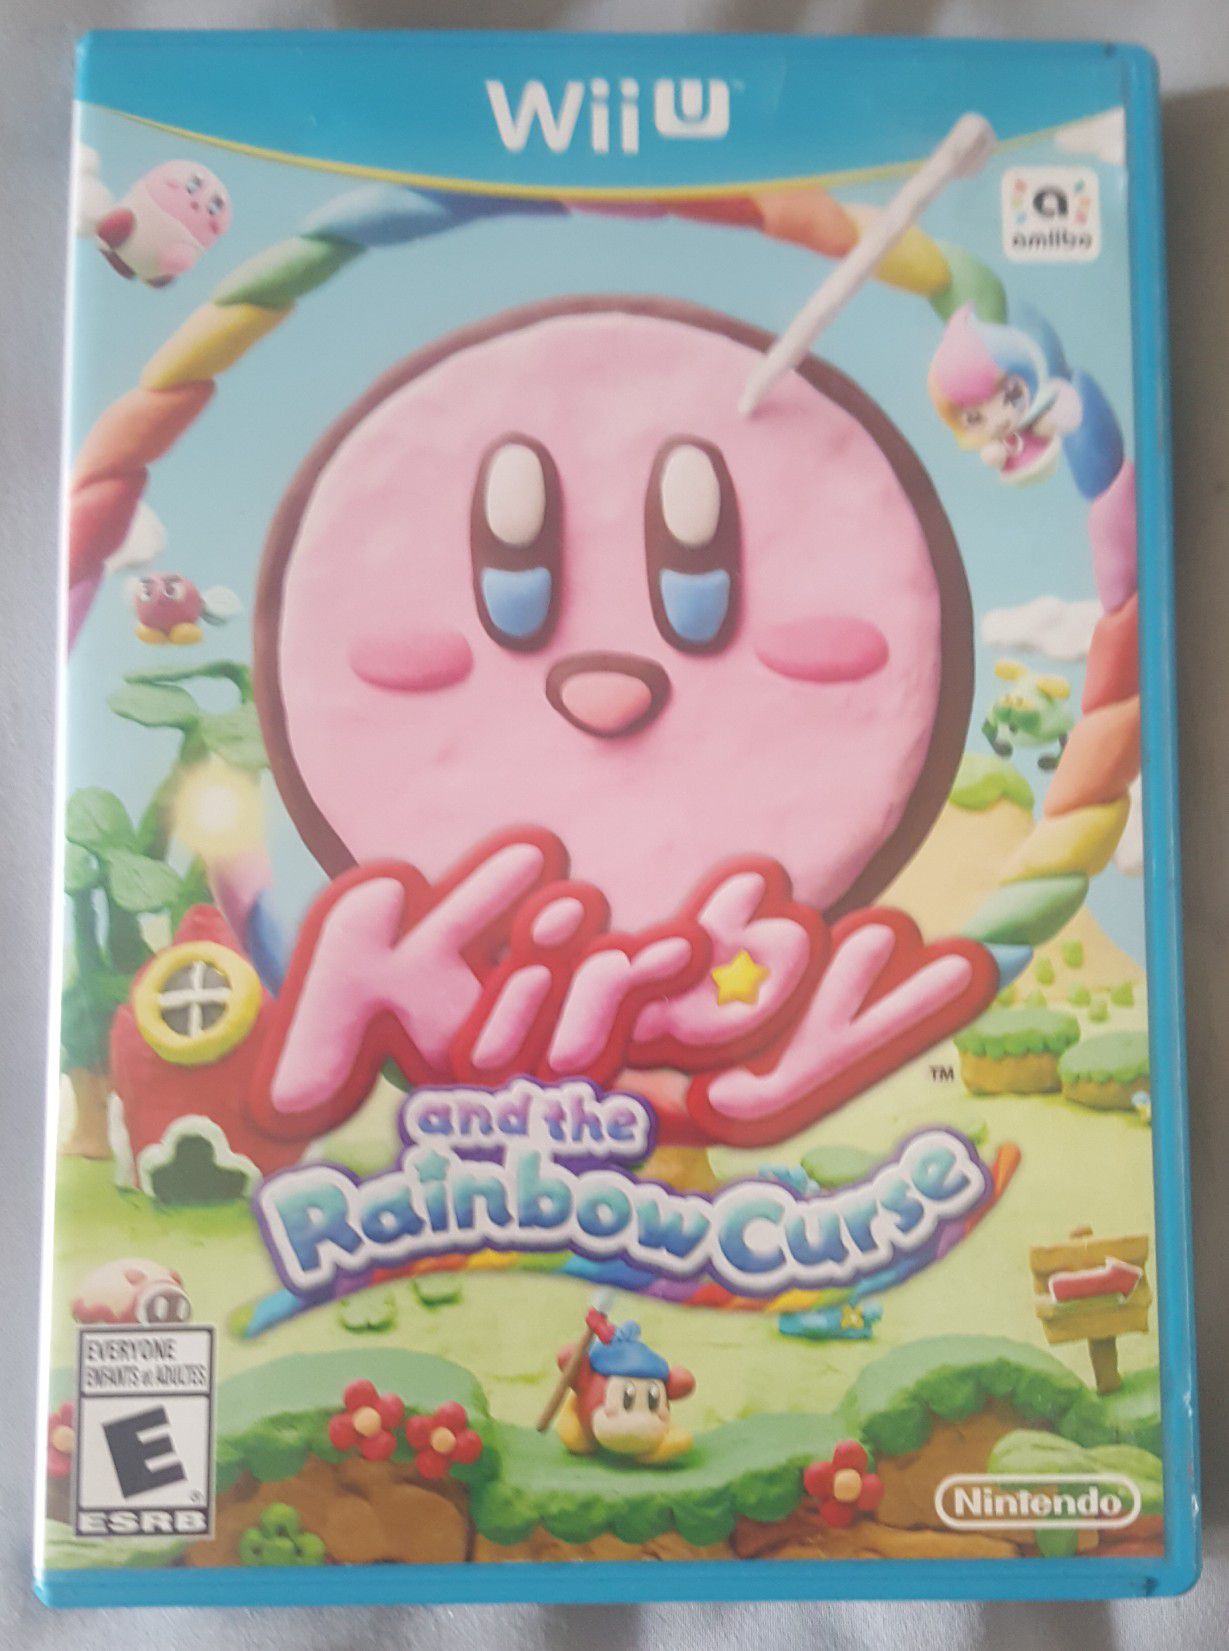 Kirby and the rainbow curse for the Nintendo Wii u